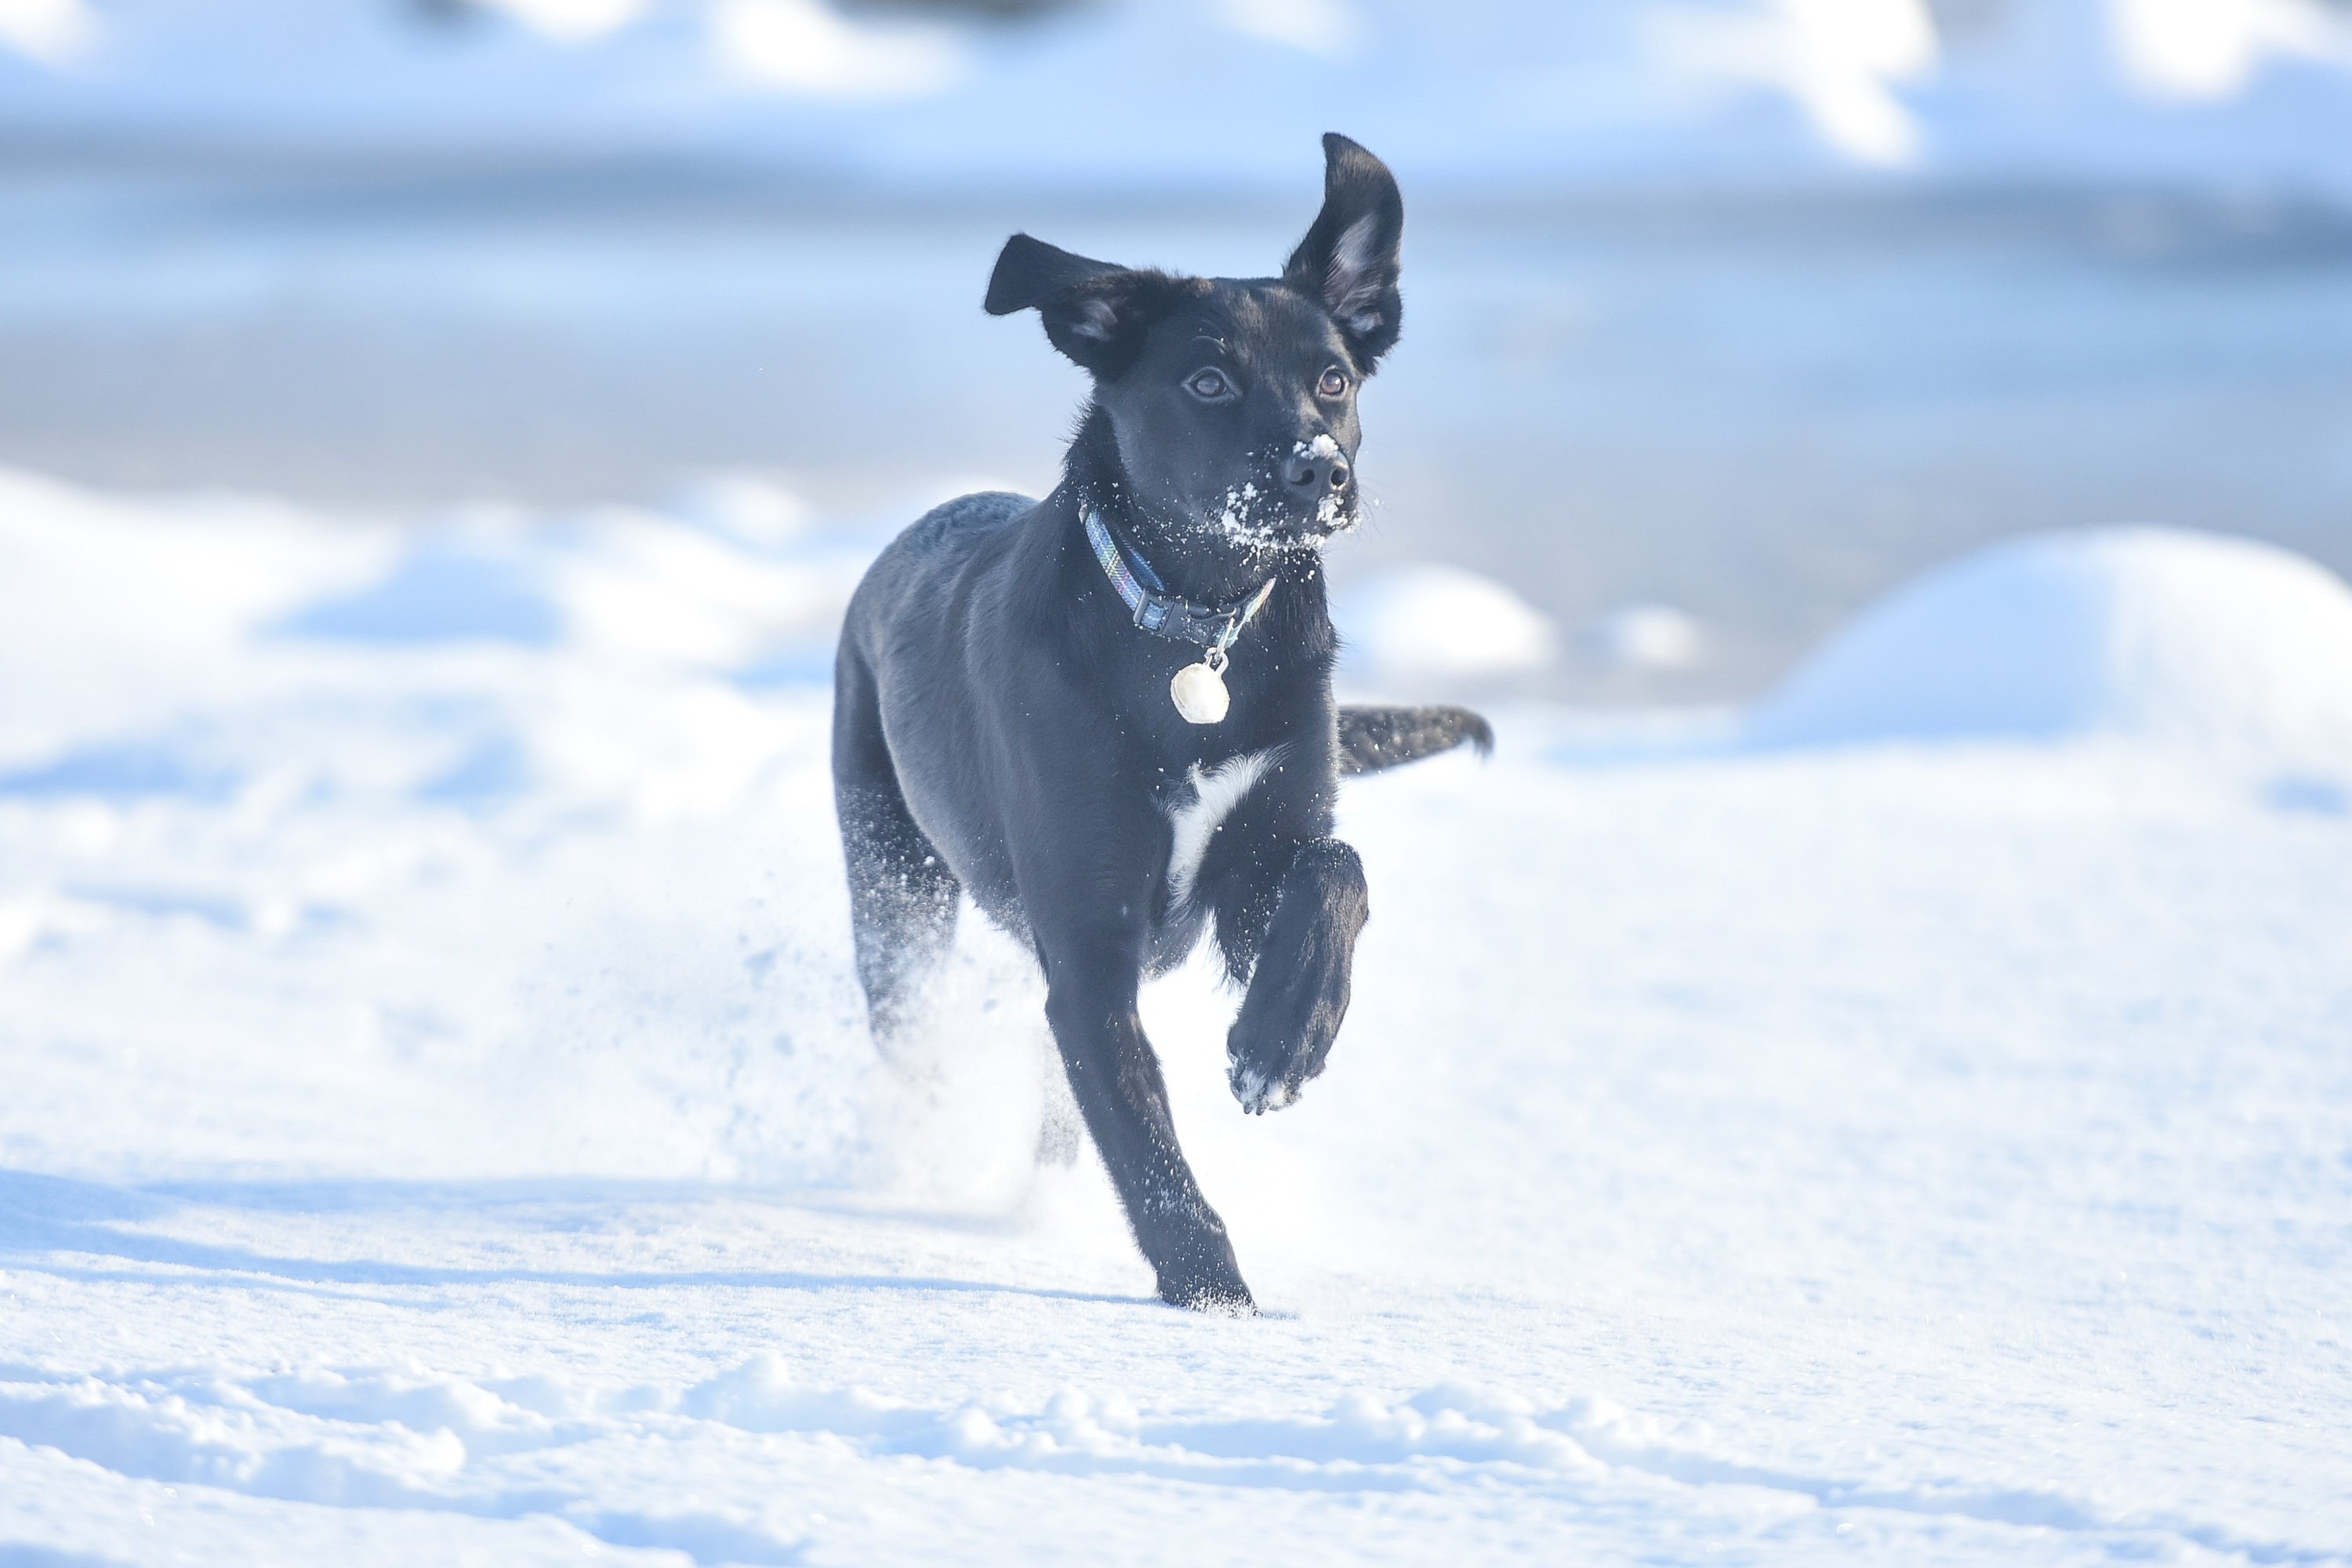 Maya, a 1 year old labrador puppy, is seen running through a snowy field near Aviemore in the Scottish Highlands on December 14 2015. Last night, Sunday, Scotland's coldest temperature for this Winter was recorded in Dalwhinnie at -8.7C. Up to 15cm of snow fell in Aviemore overnight and local schools were closed.